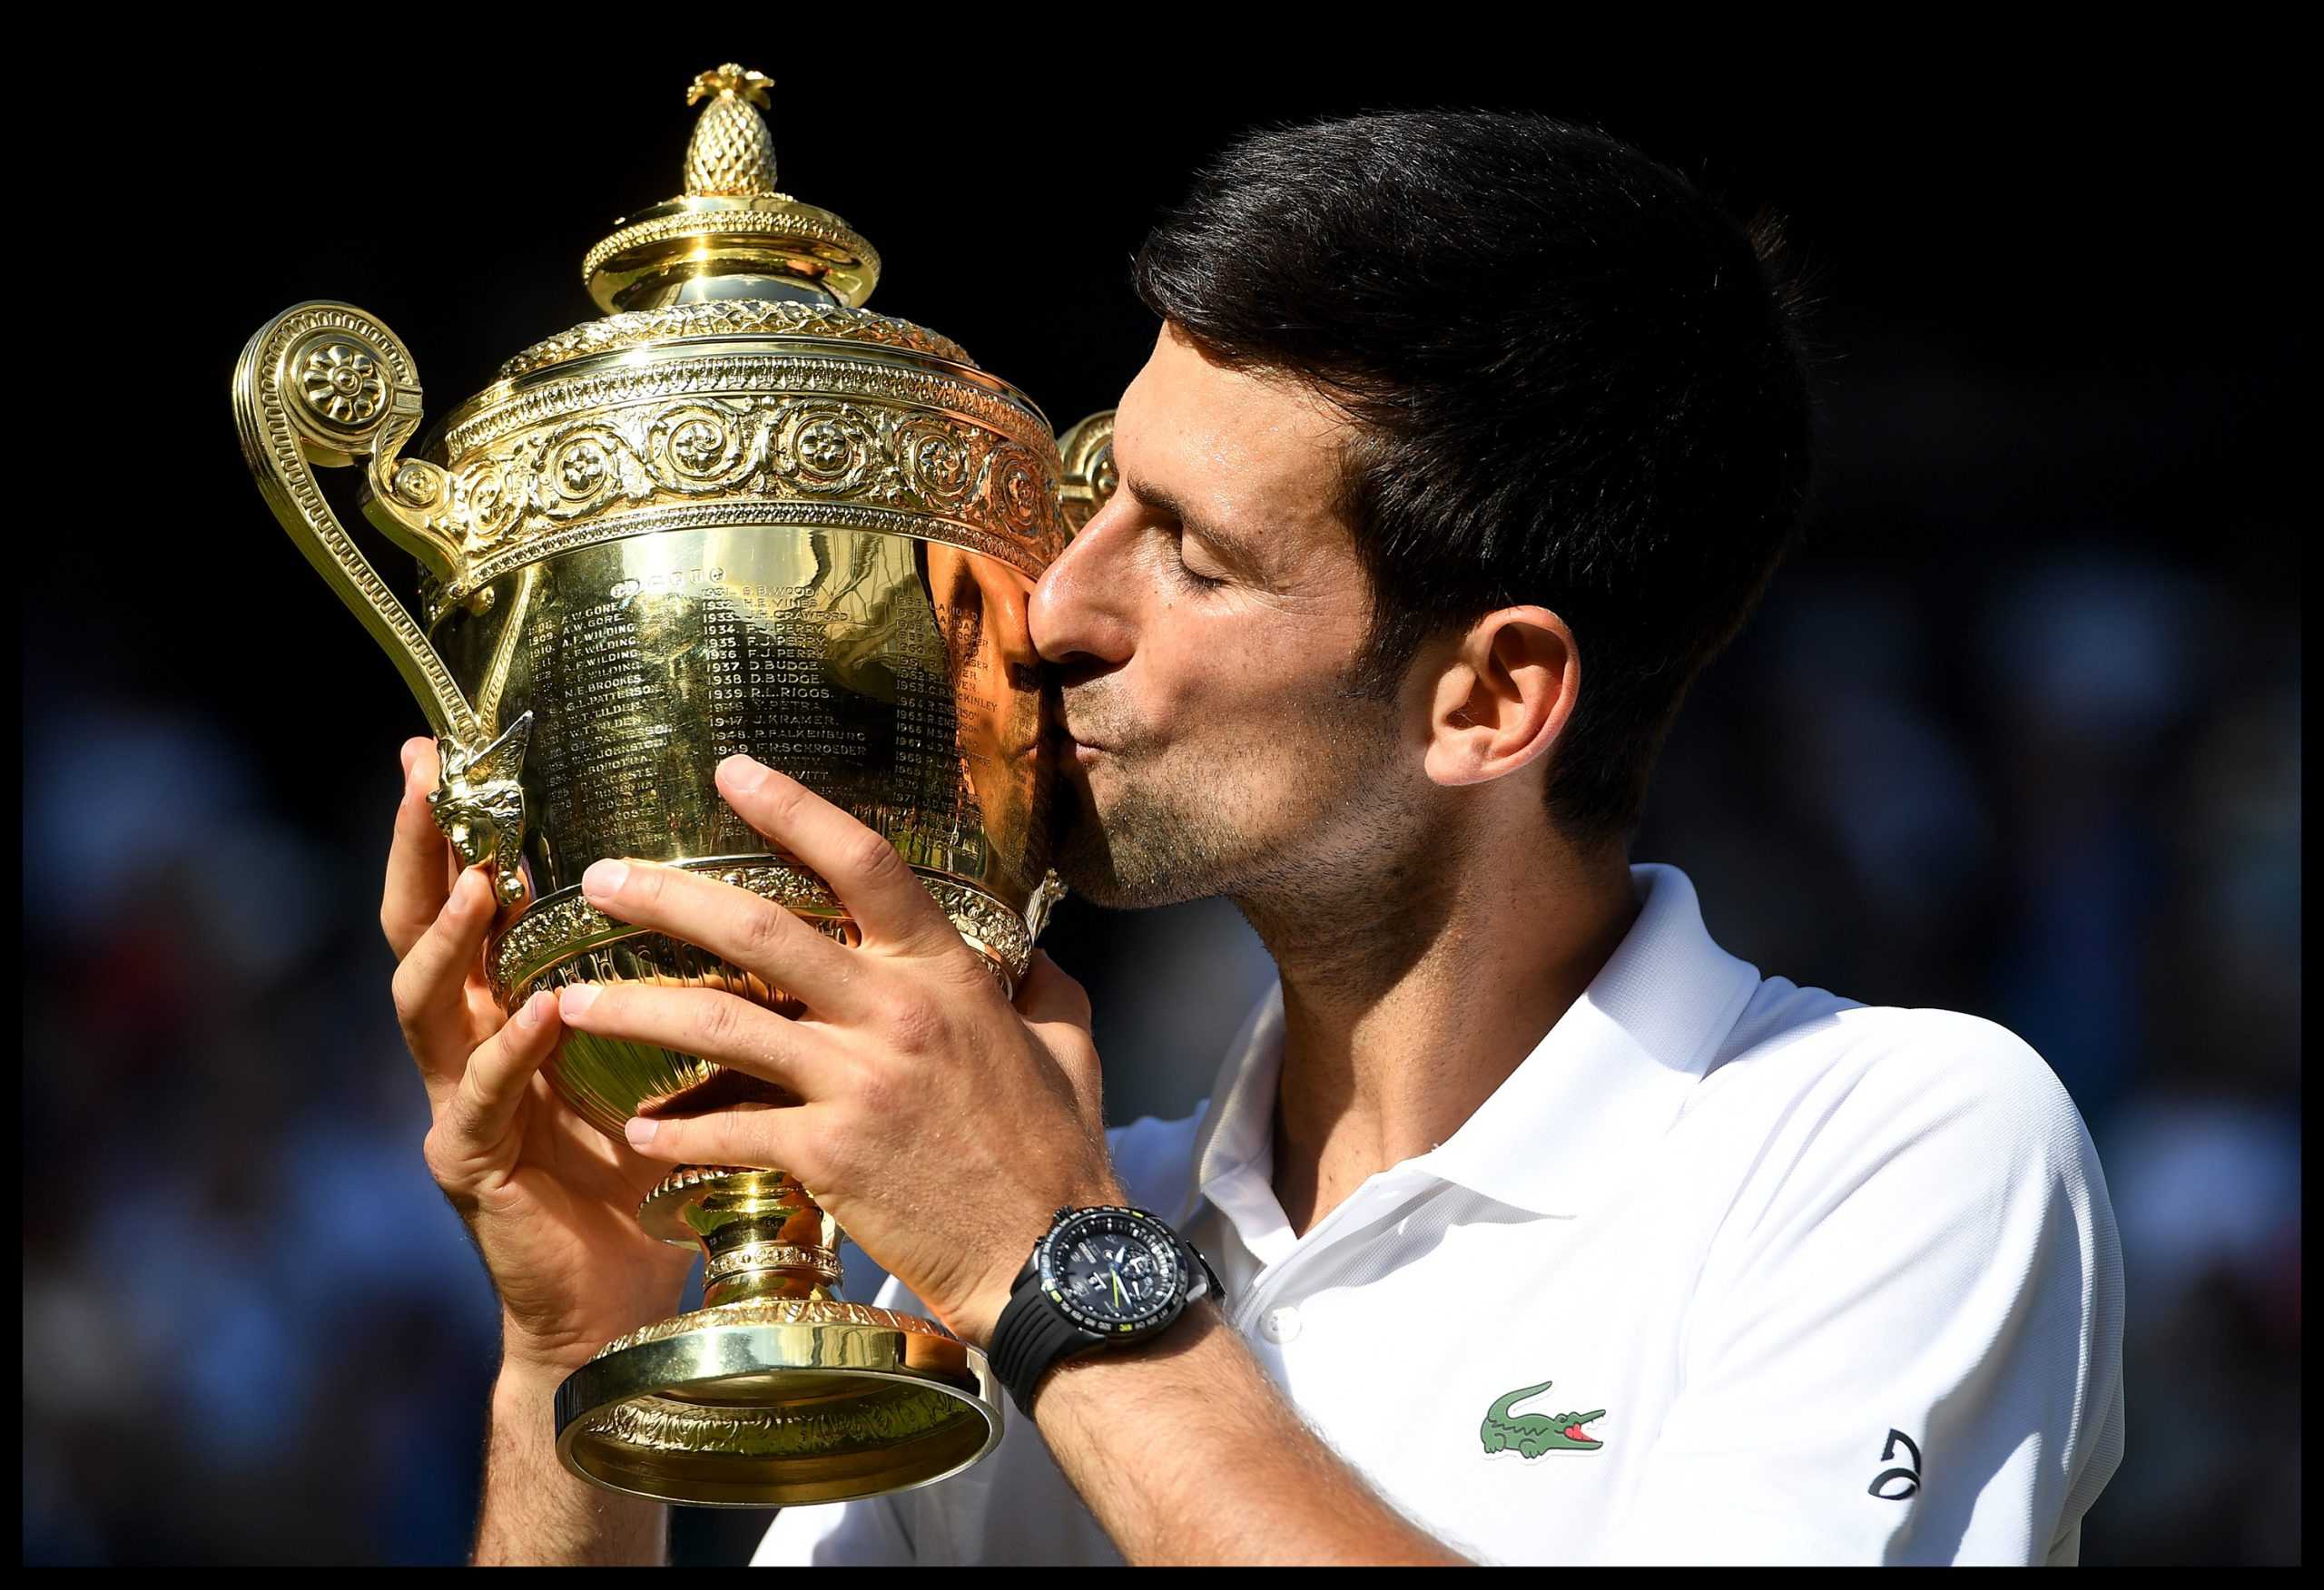 Novak Djokovic of Serbia celebrates with the trophy after winning his fourth Wimbledon by beating Kevin Anderson in the Mens Final on Centre court on Day Thirteen of the Wimbledon Tennis Championships on Sunday, July 15, 2018 in London, England. (Andrew Parsons/i-Images/Zuma Press/TNS)